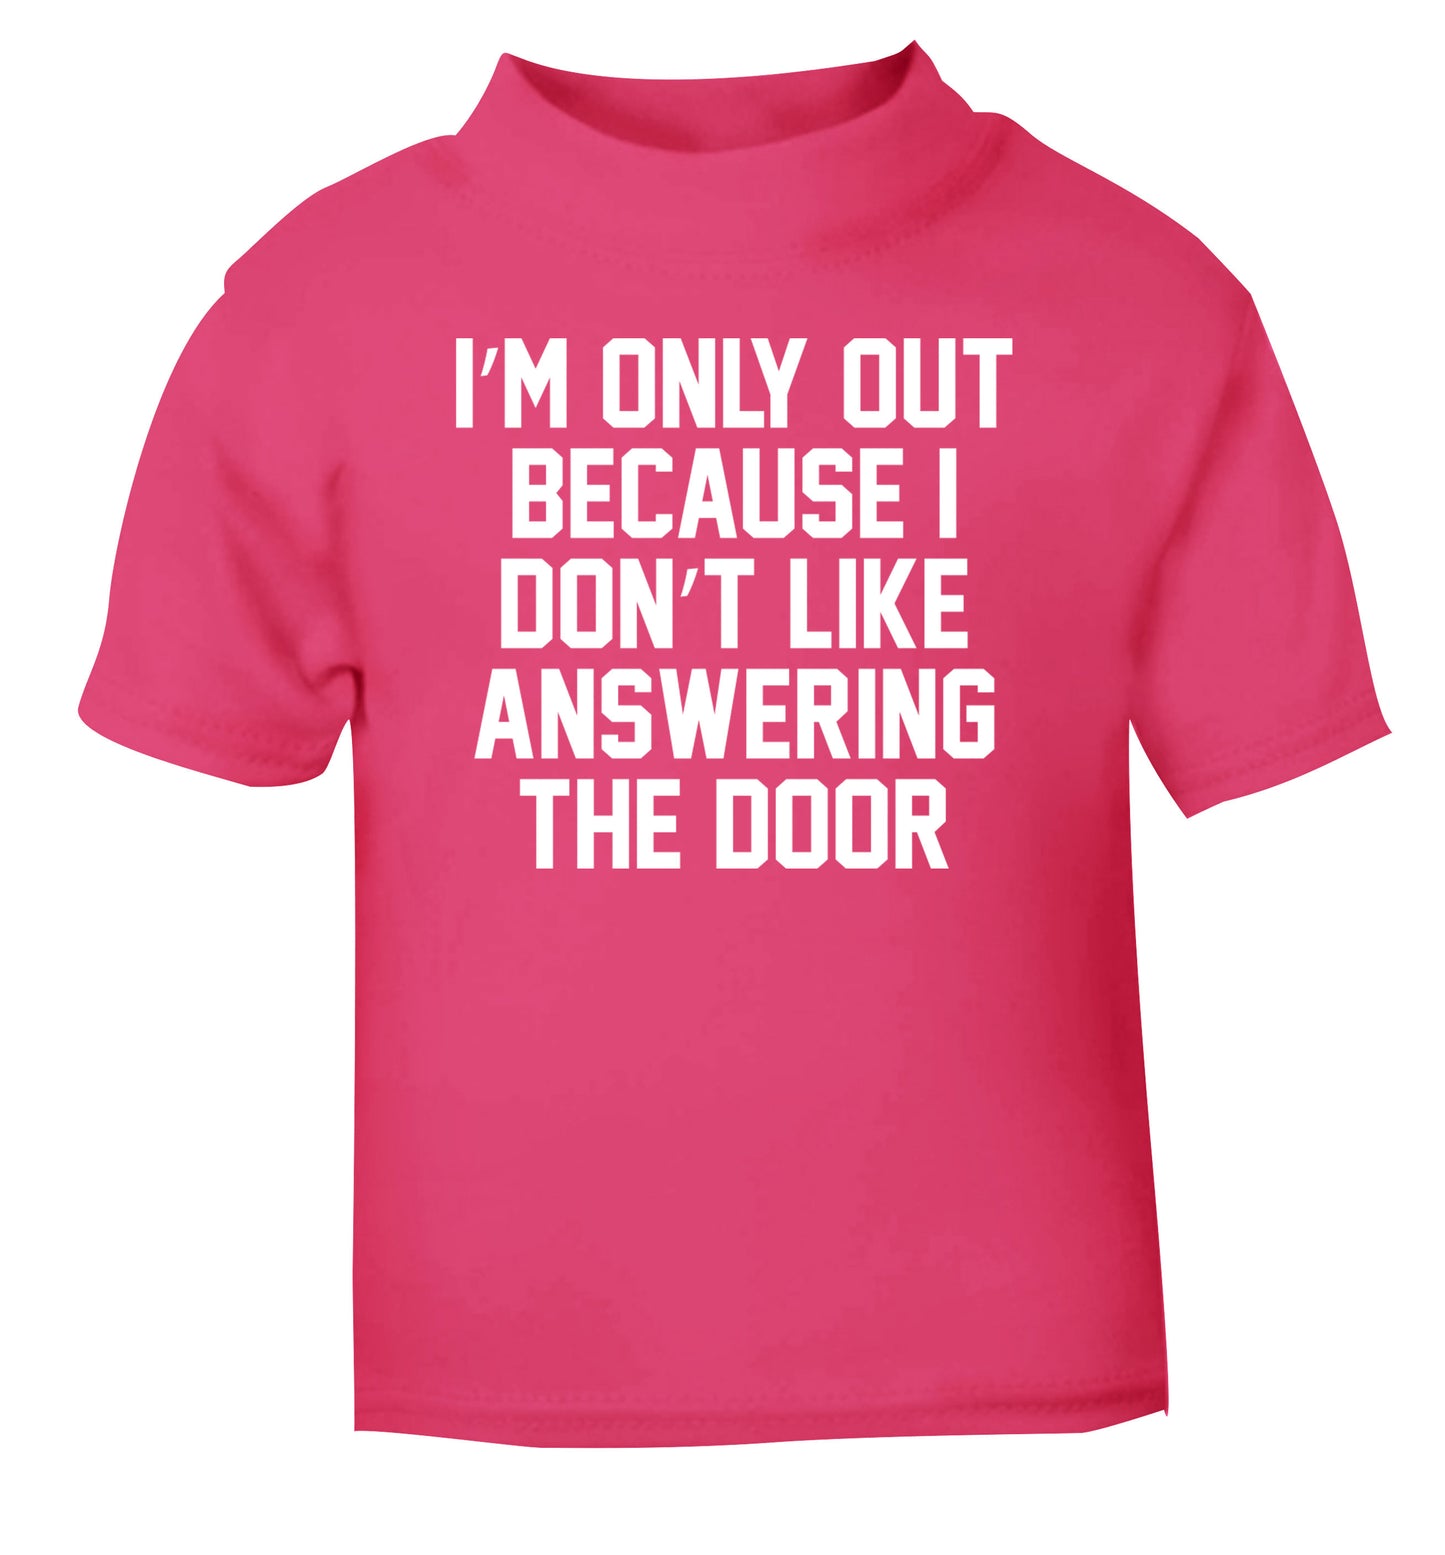 I'm only out because I don't like answering the door pink Baby Toddler Tshirt 2 Years